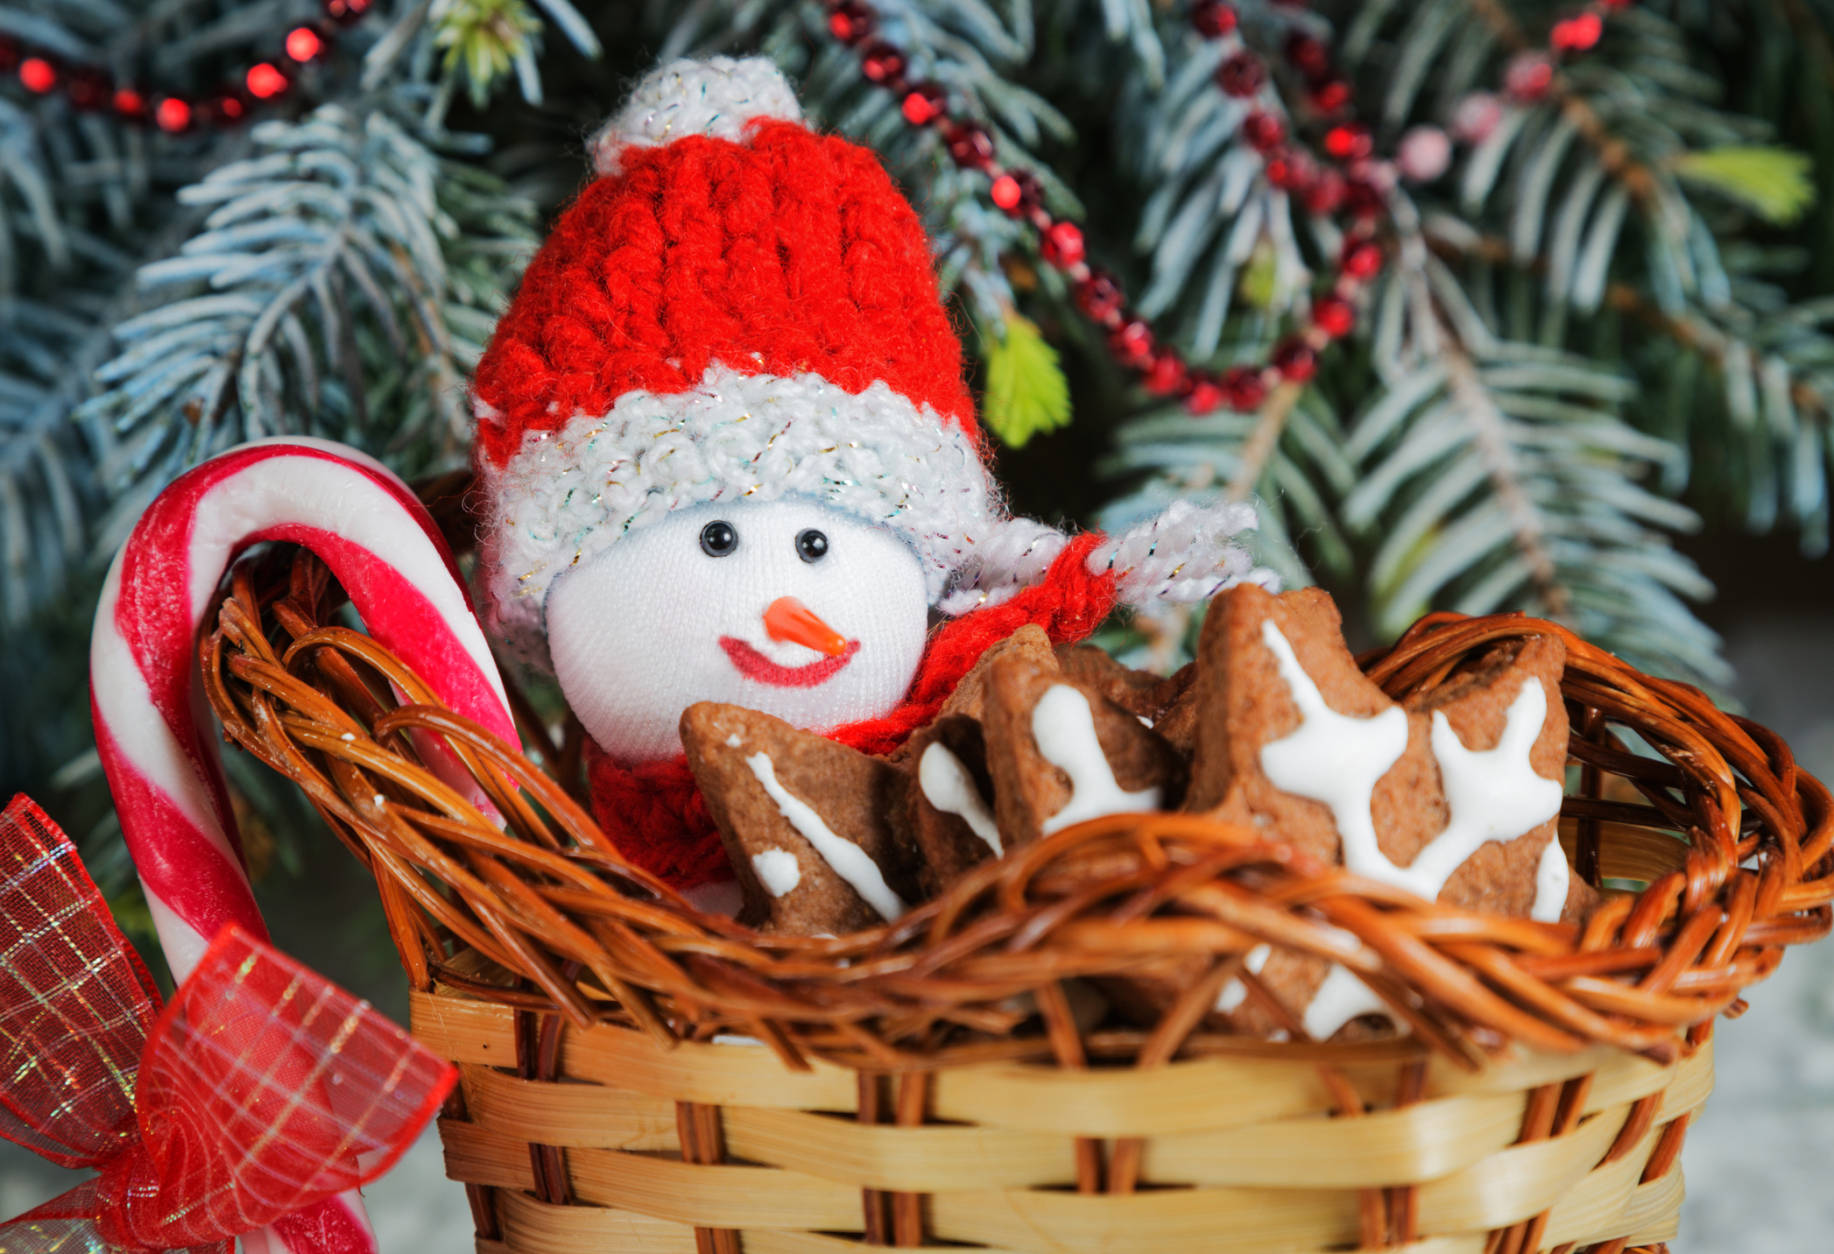 Gift basket-sleigh with cookies, candy and a toy snowman dressed in warm clothes against the background of the winter forest